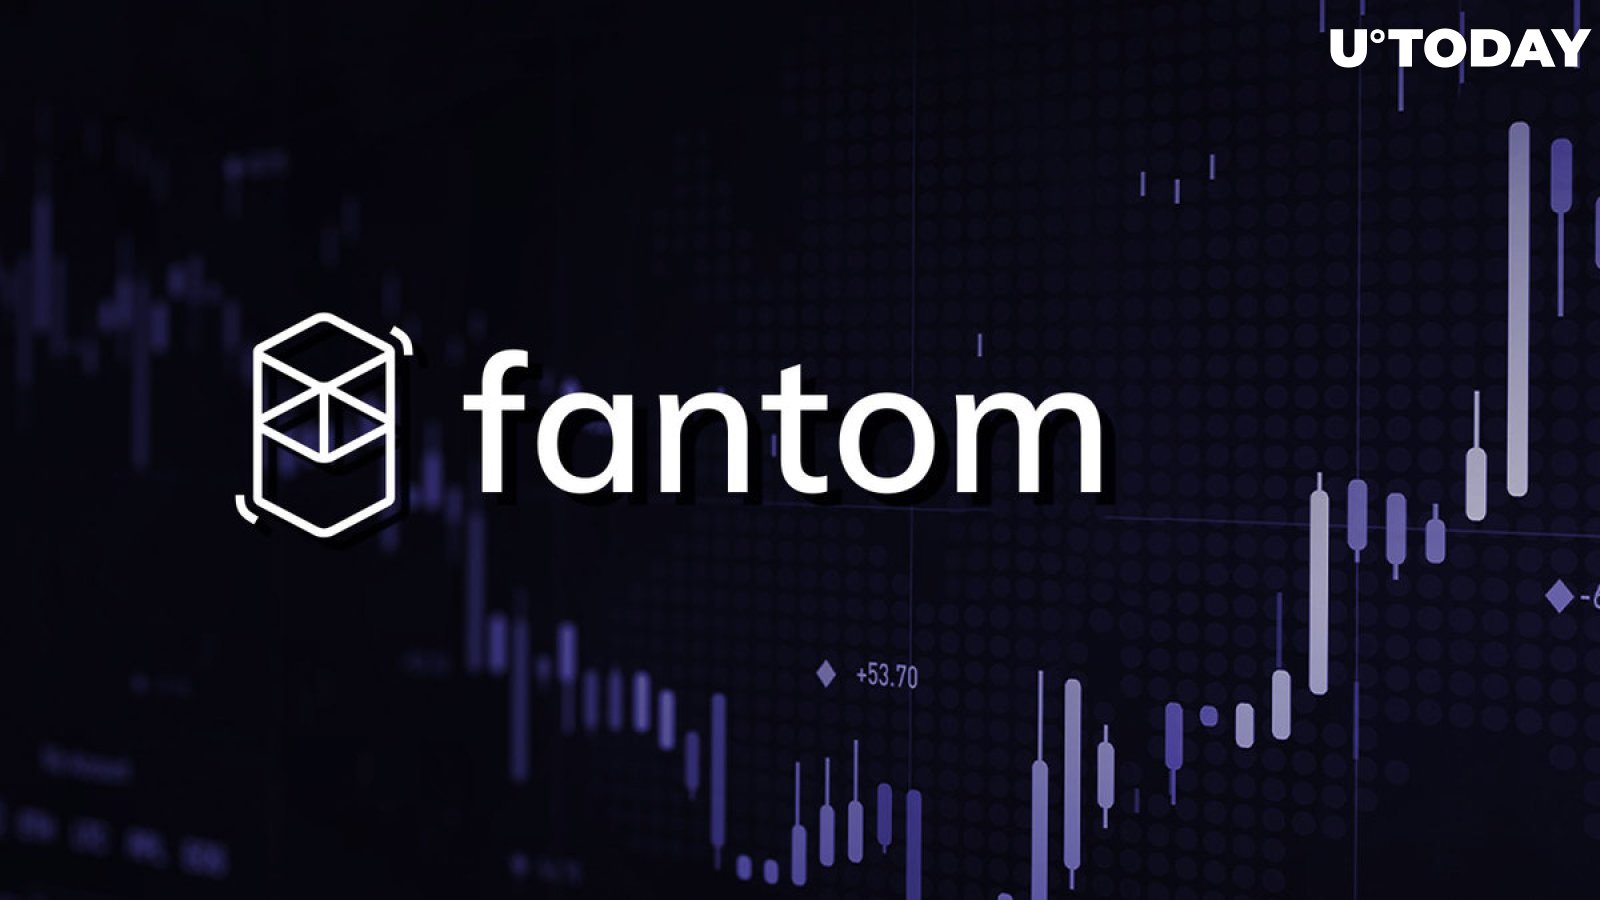 Fantom (FTM) Price up 23% on Andre Cronje's Unexpected Comeback, YFI Pumps Too